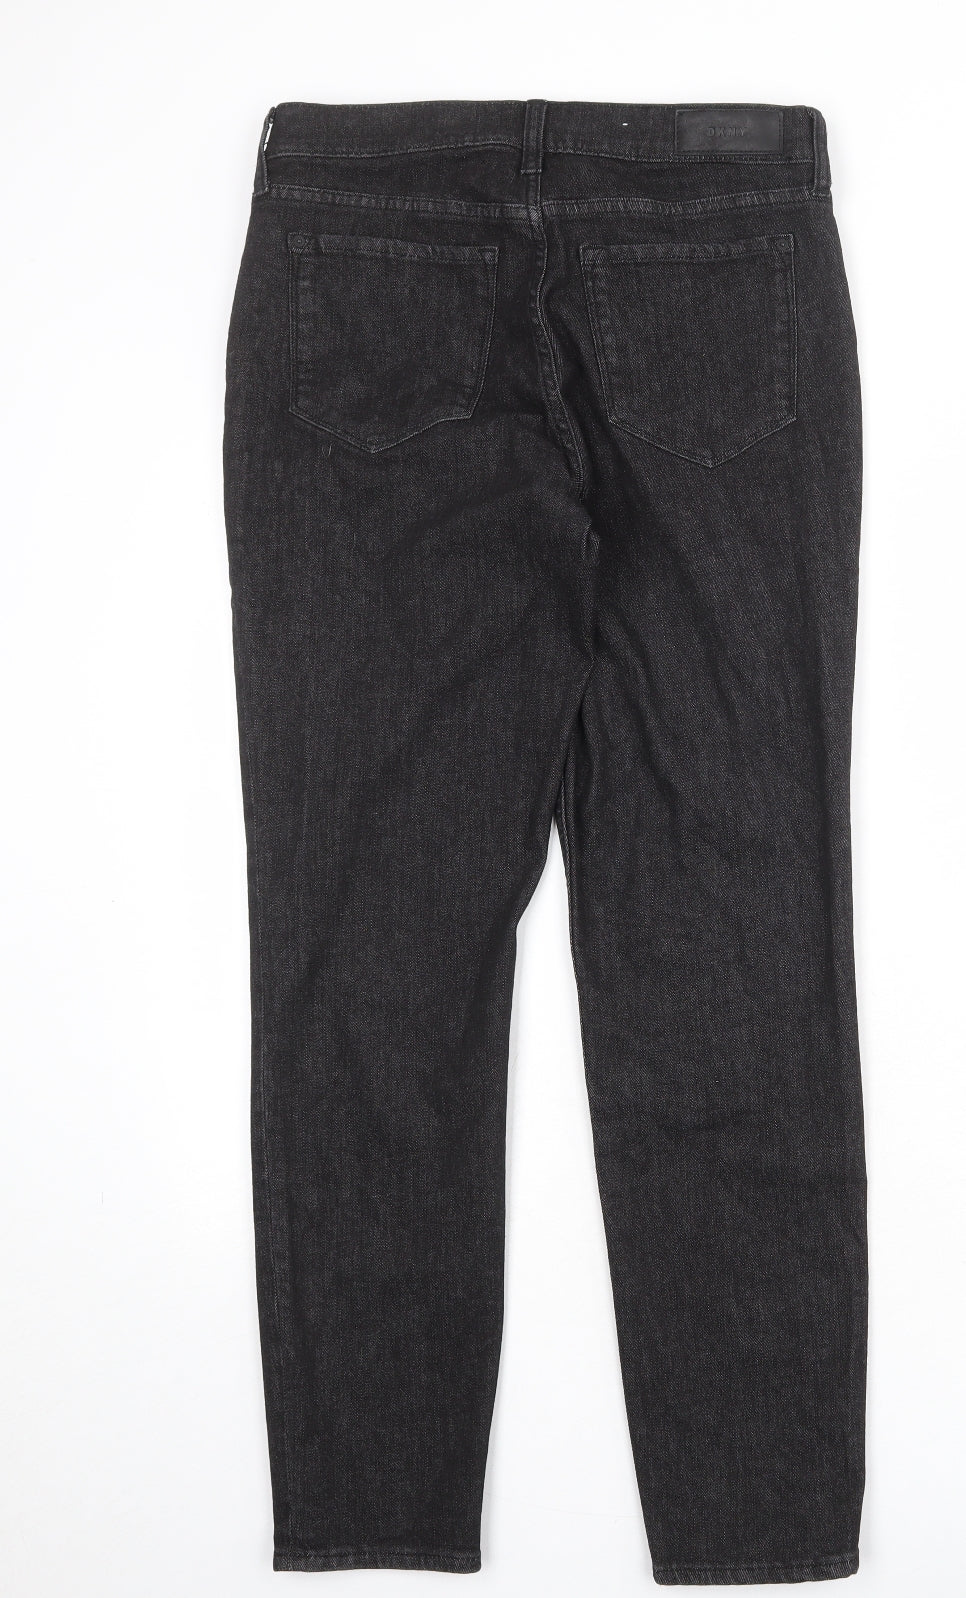 DKNY Womens Grey Cotton Tapered Jeans Size 10 Regular Zip